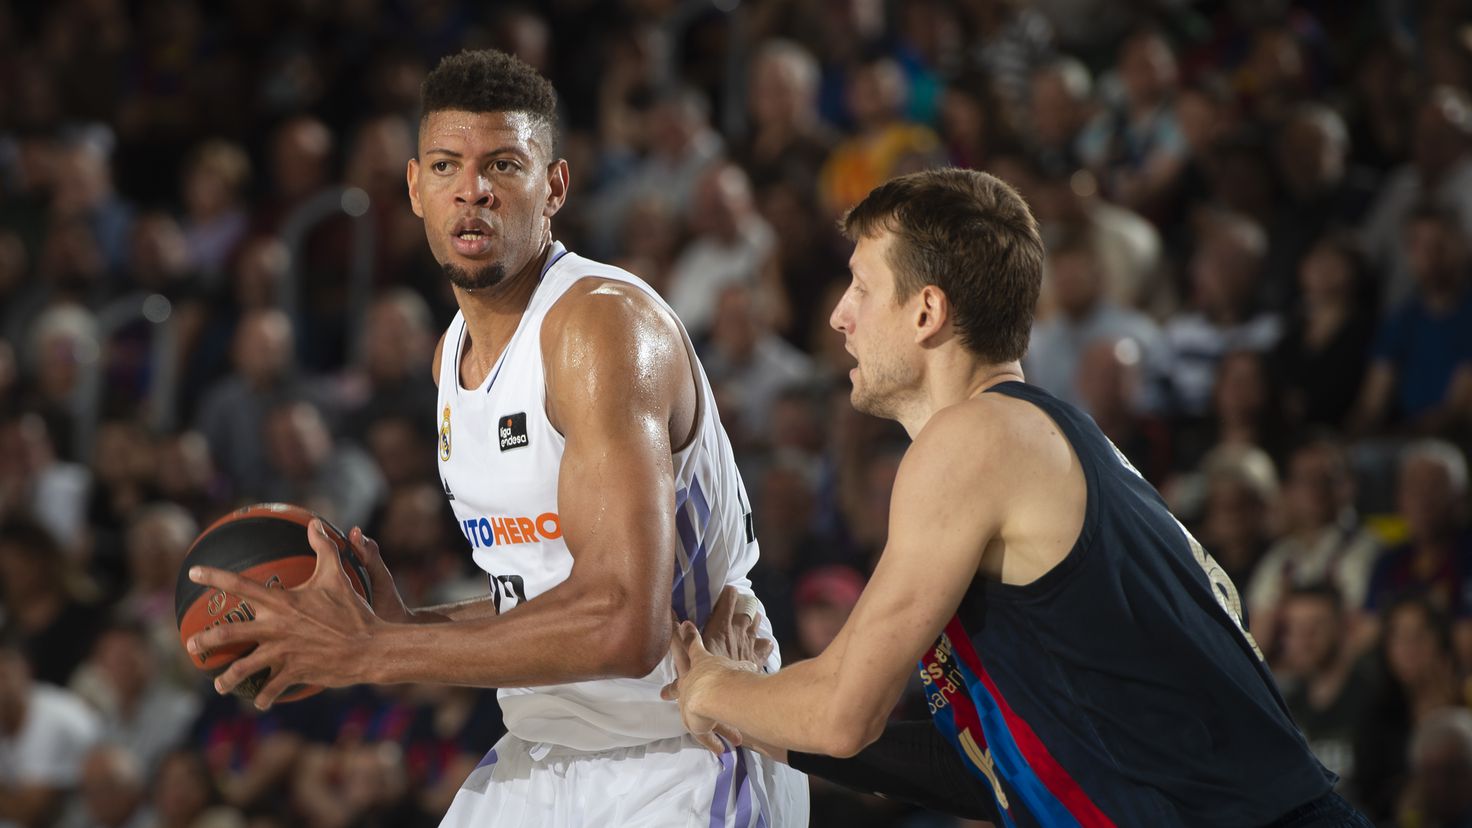 How many times have Barcelona and Real Madrid met in a Euroleague Final Four?
